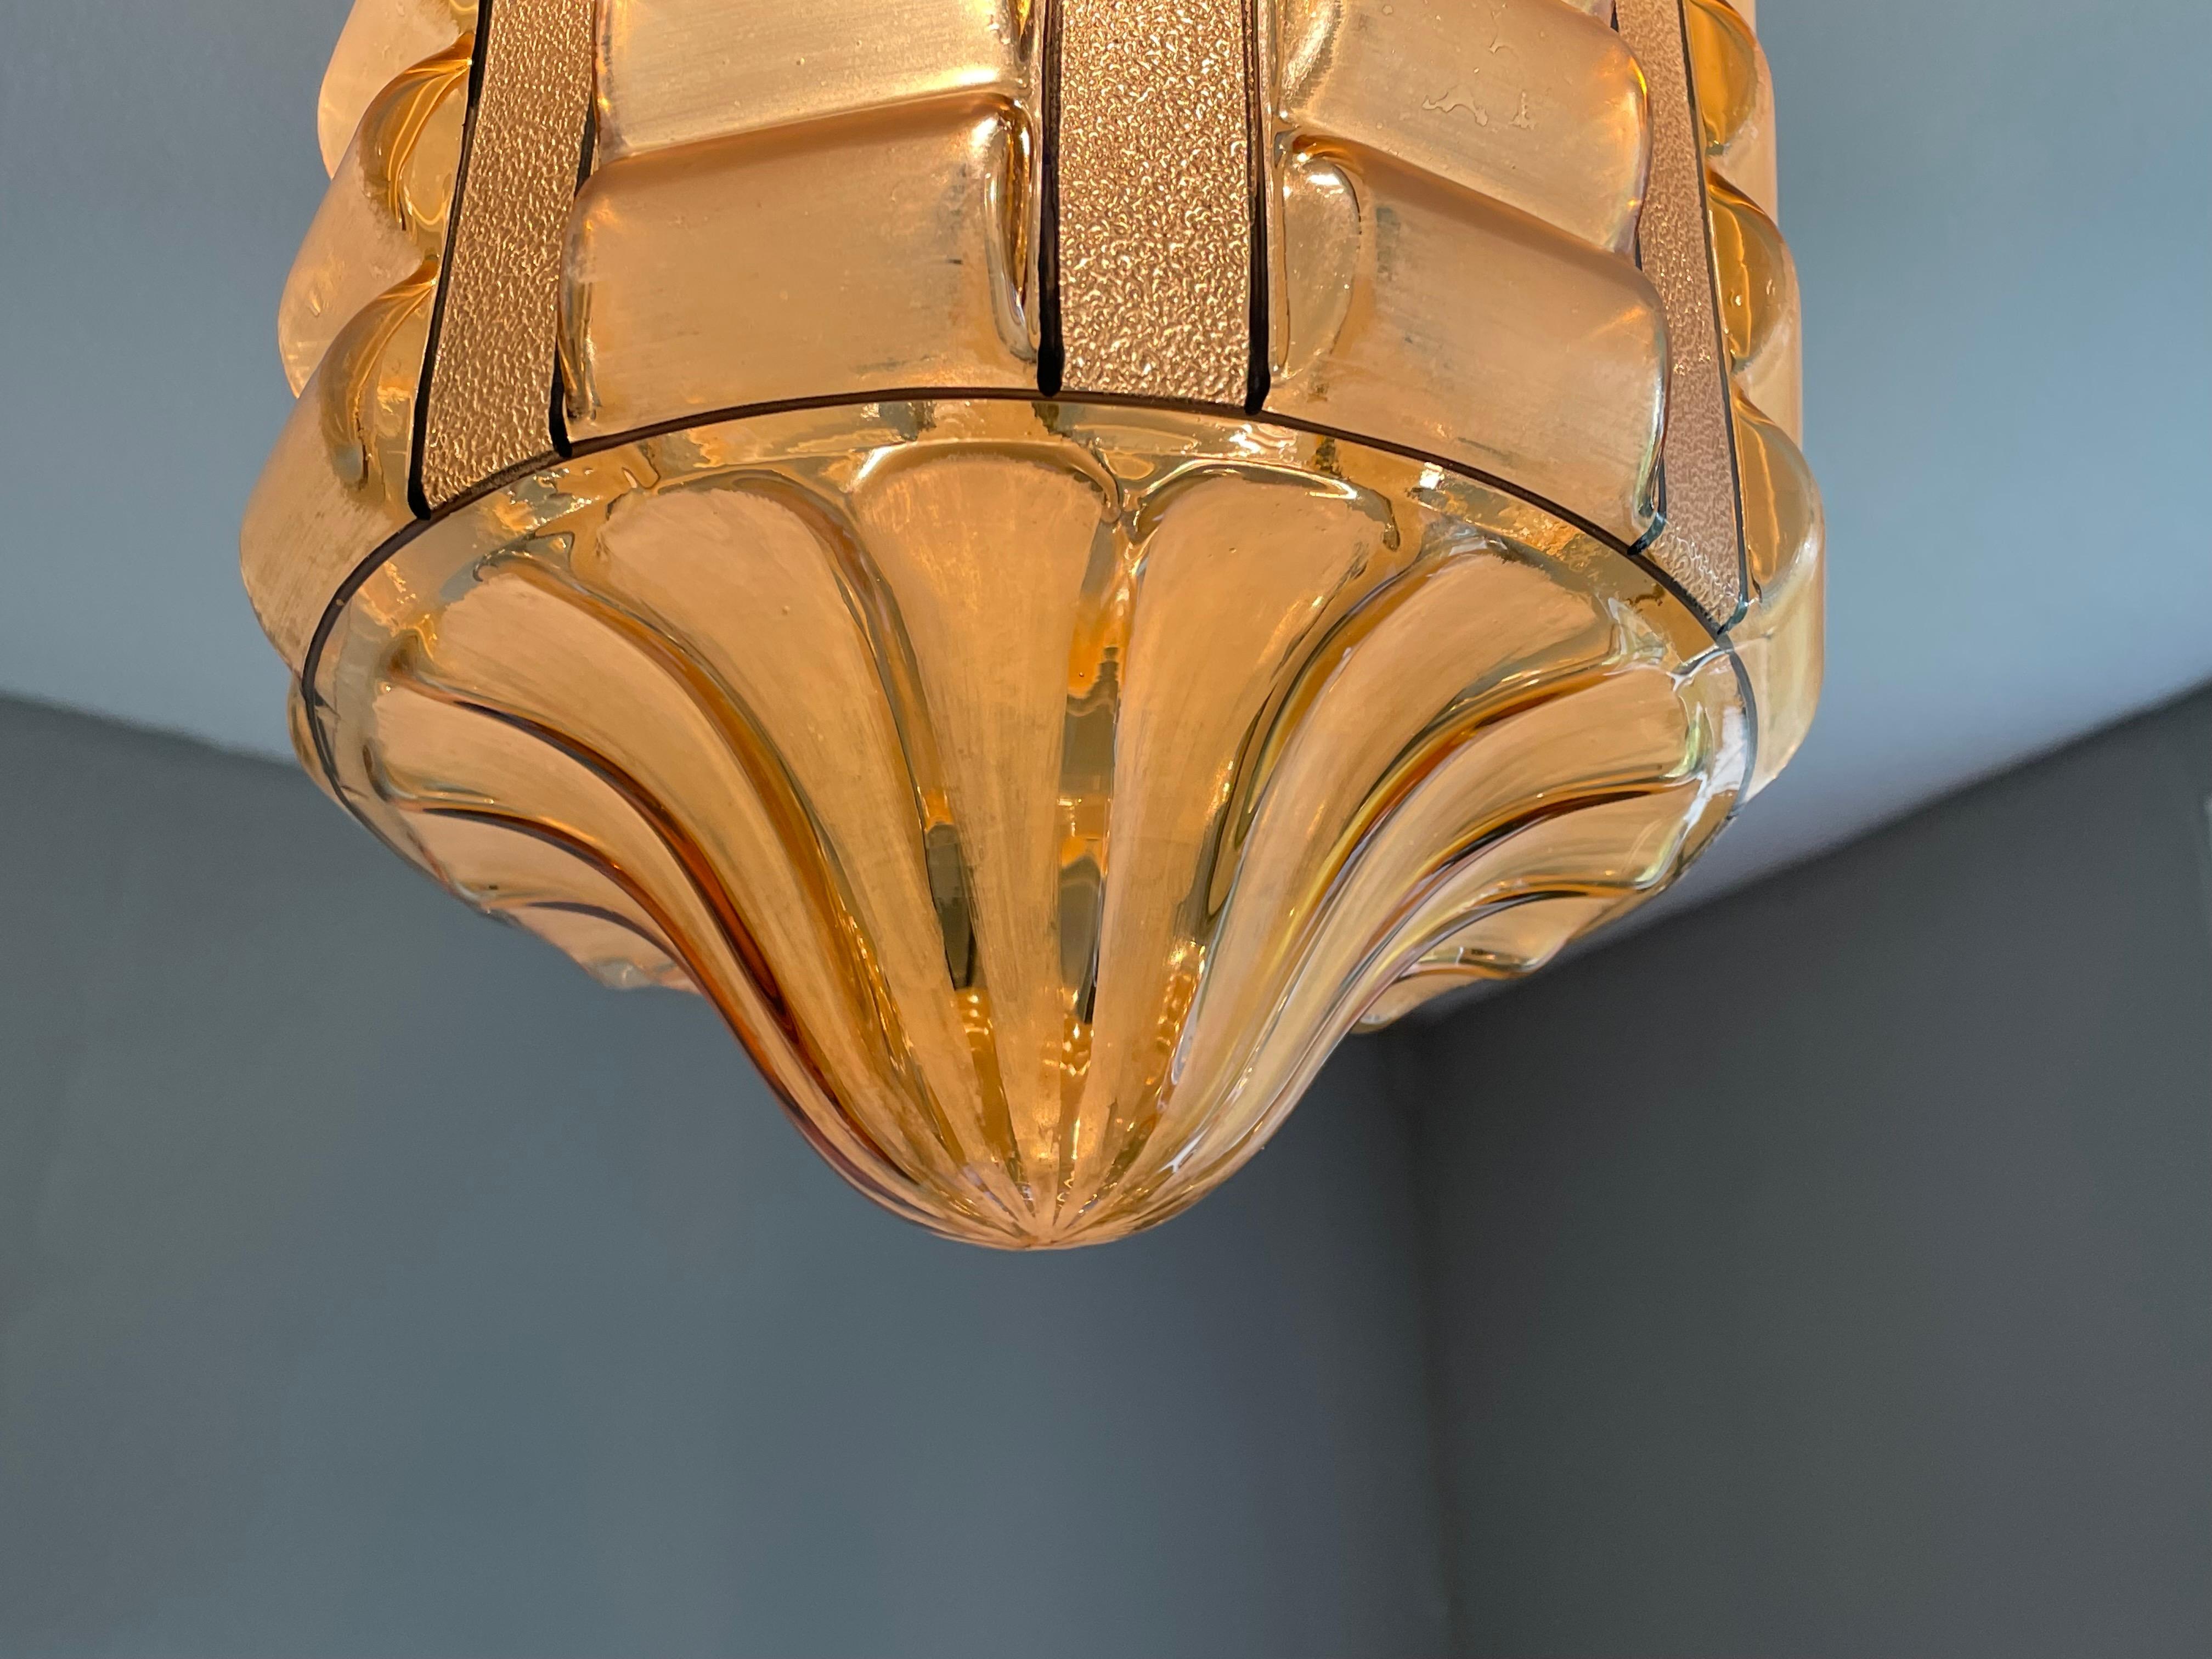 20th Century Rare Rounded Geometrical Design Art Deco Pendant Light with Brass Chain & Canopy